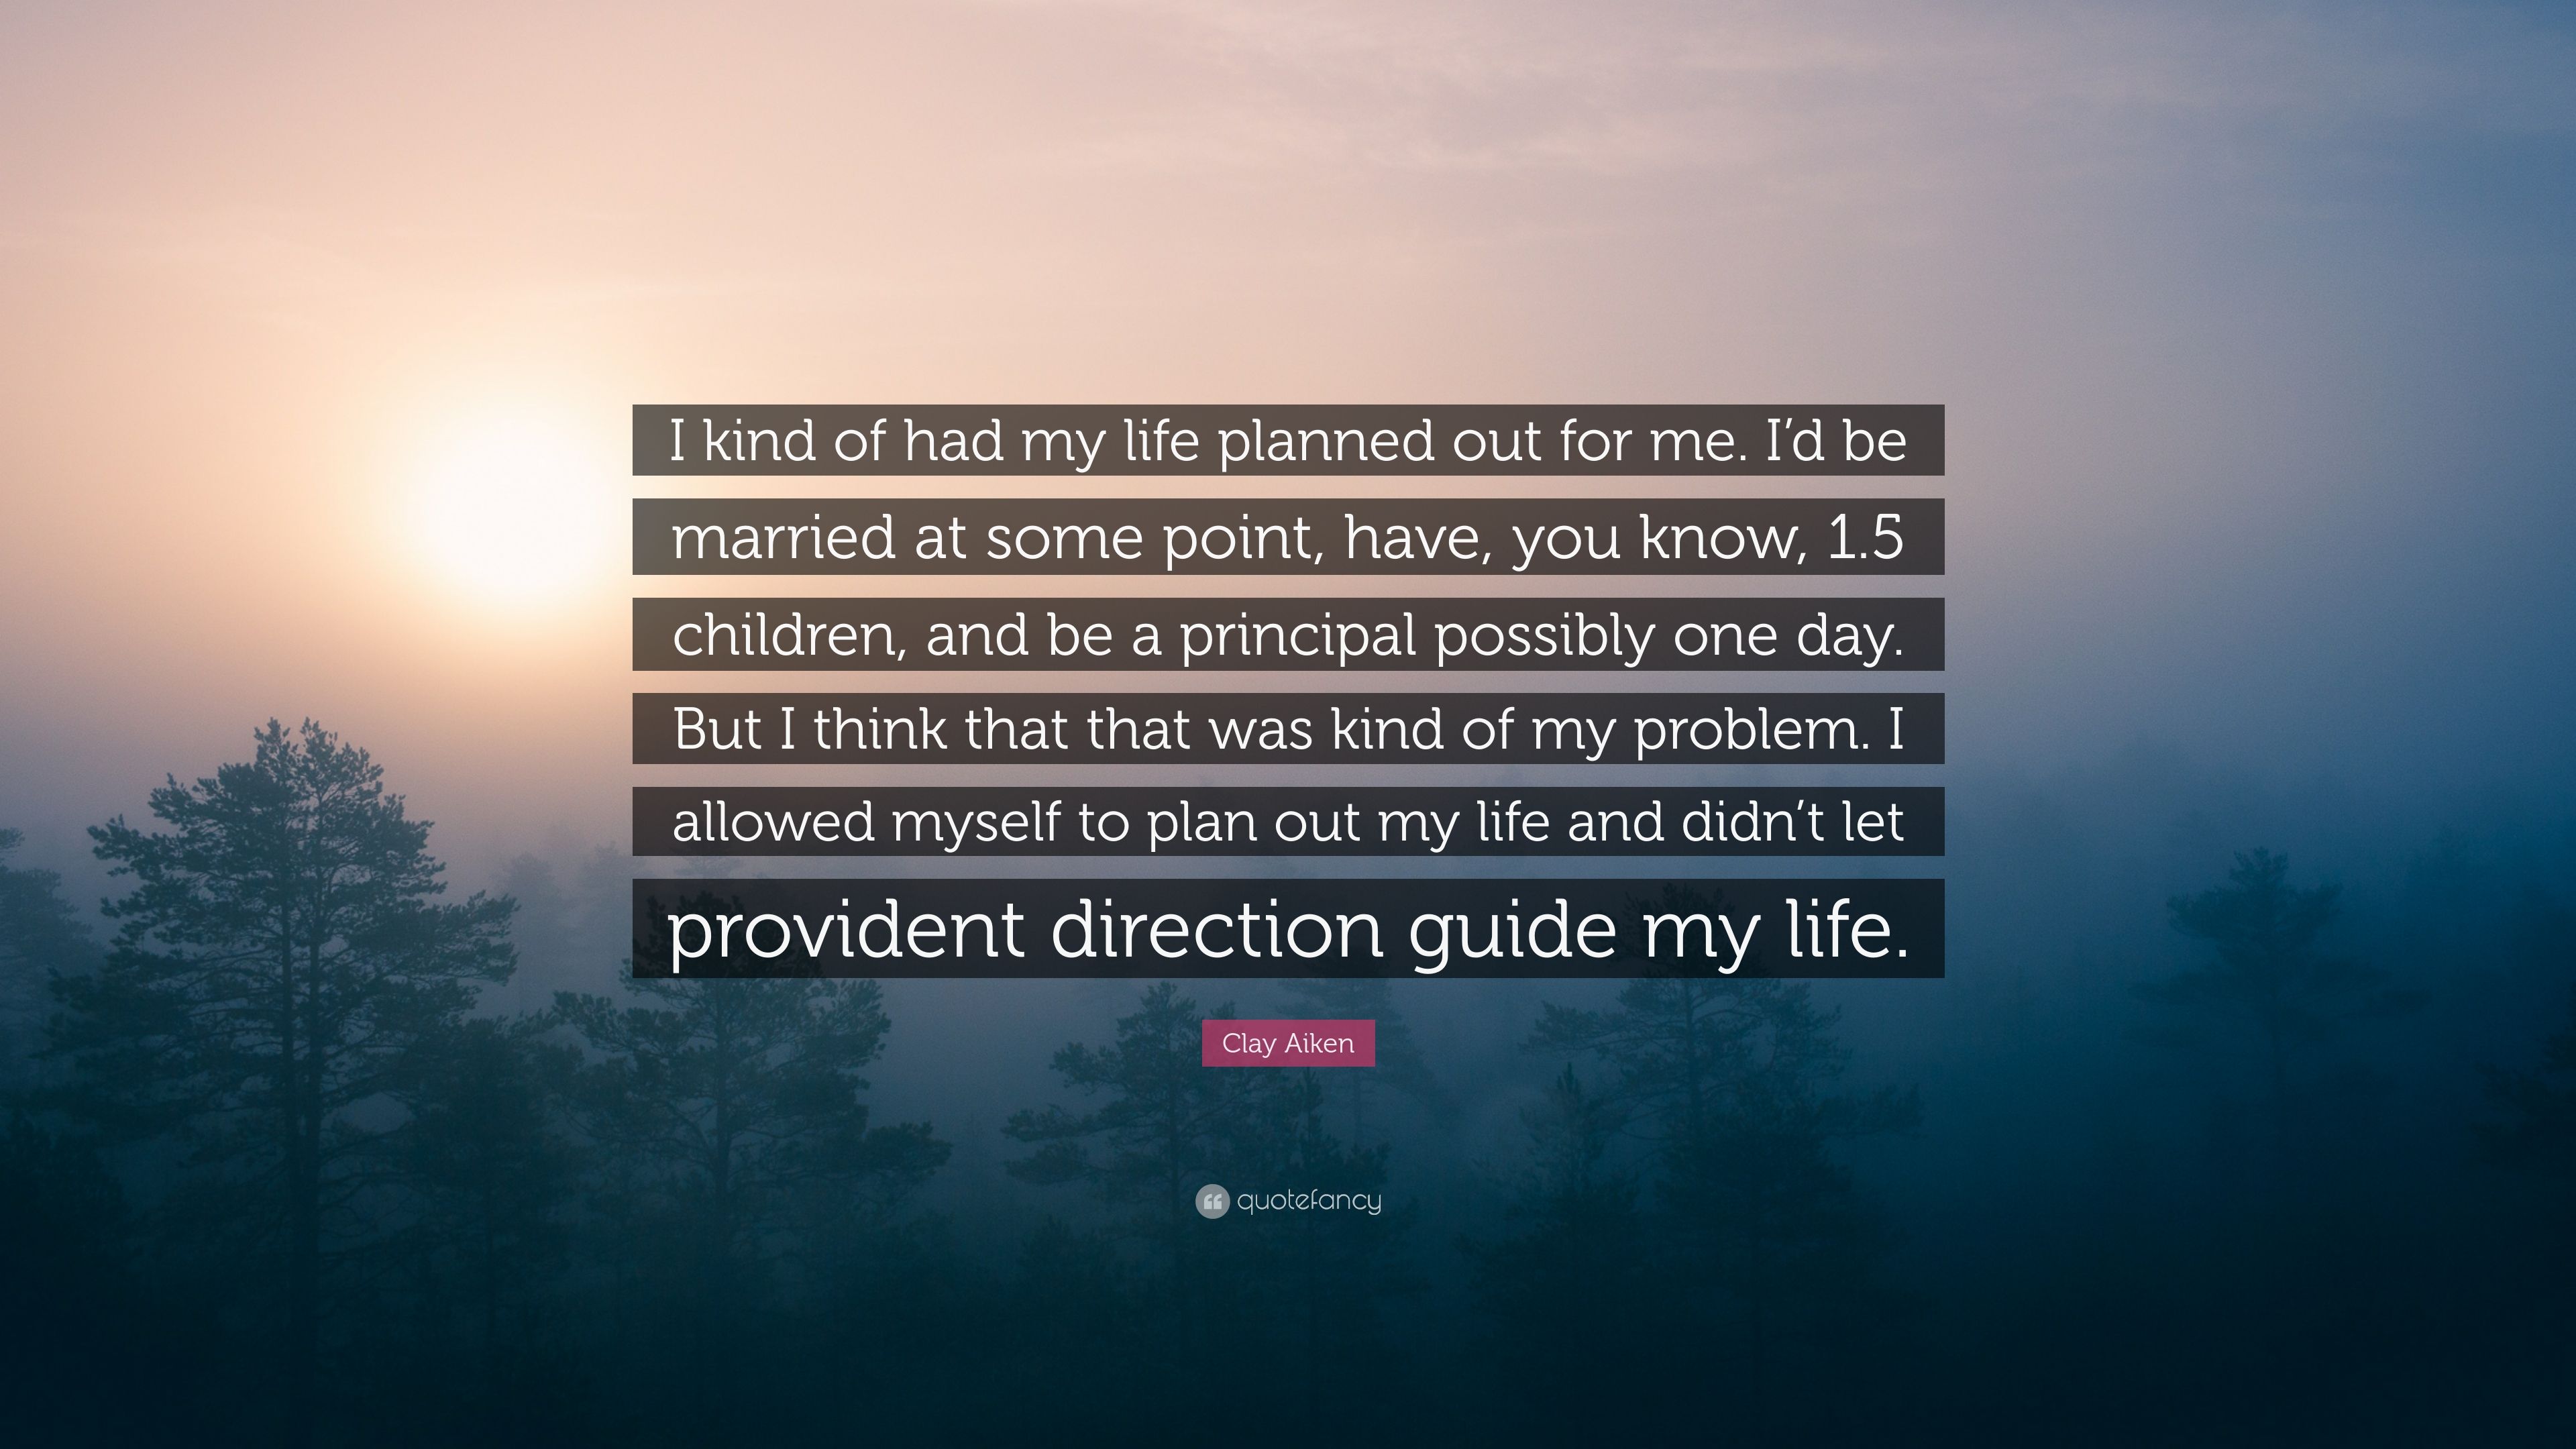 Clay Aiken Quote: “I kind of had my life planned out for me. I'd be ...